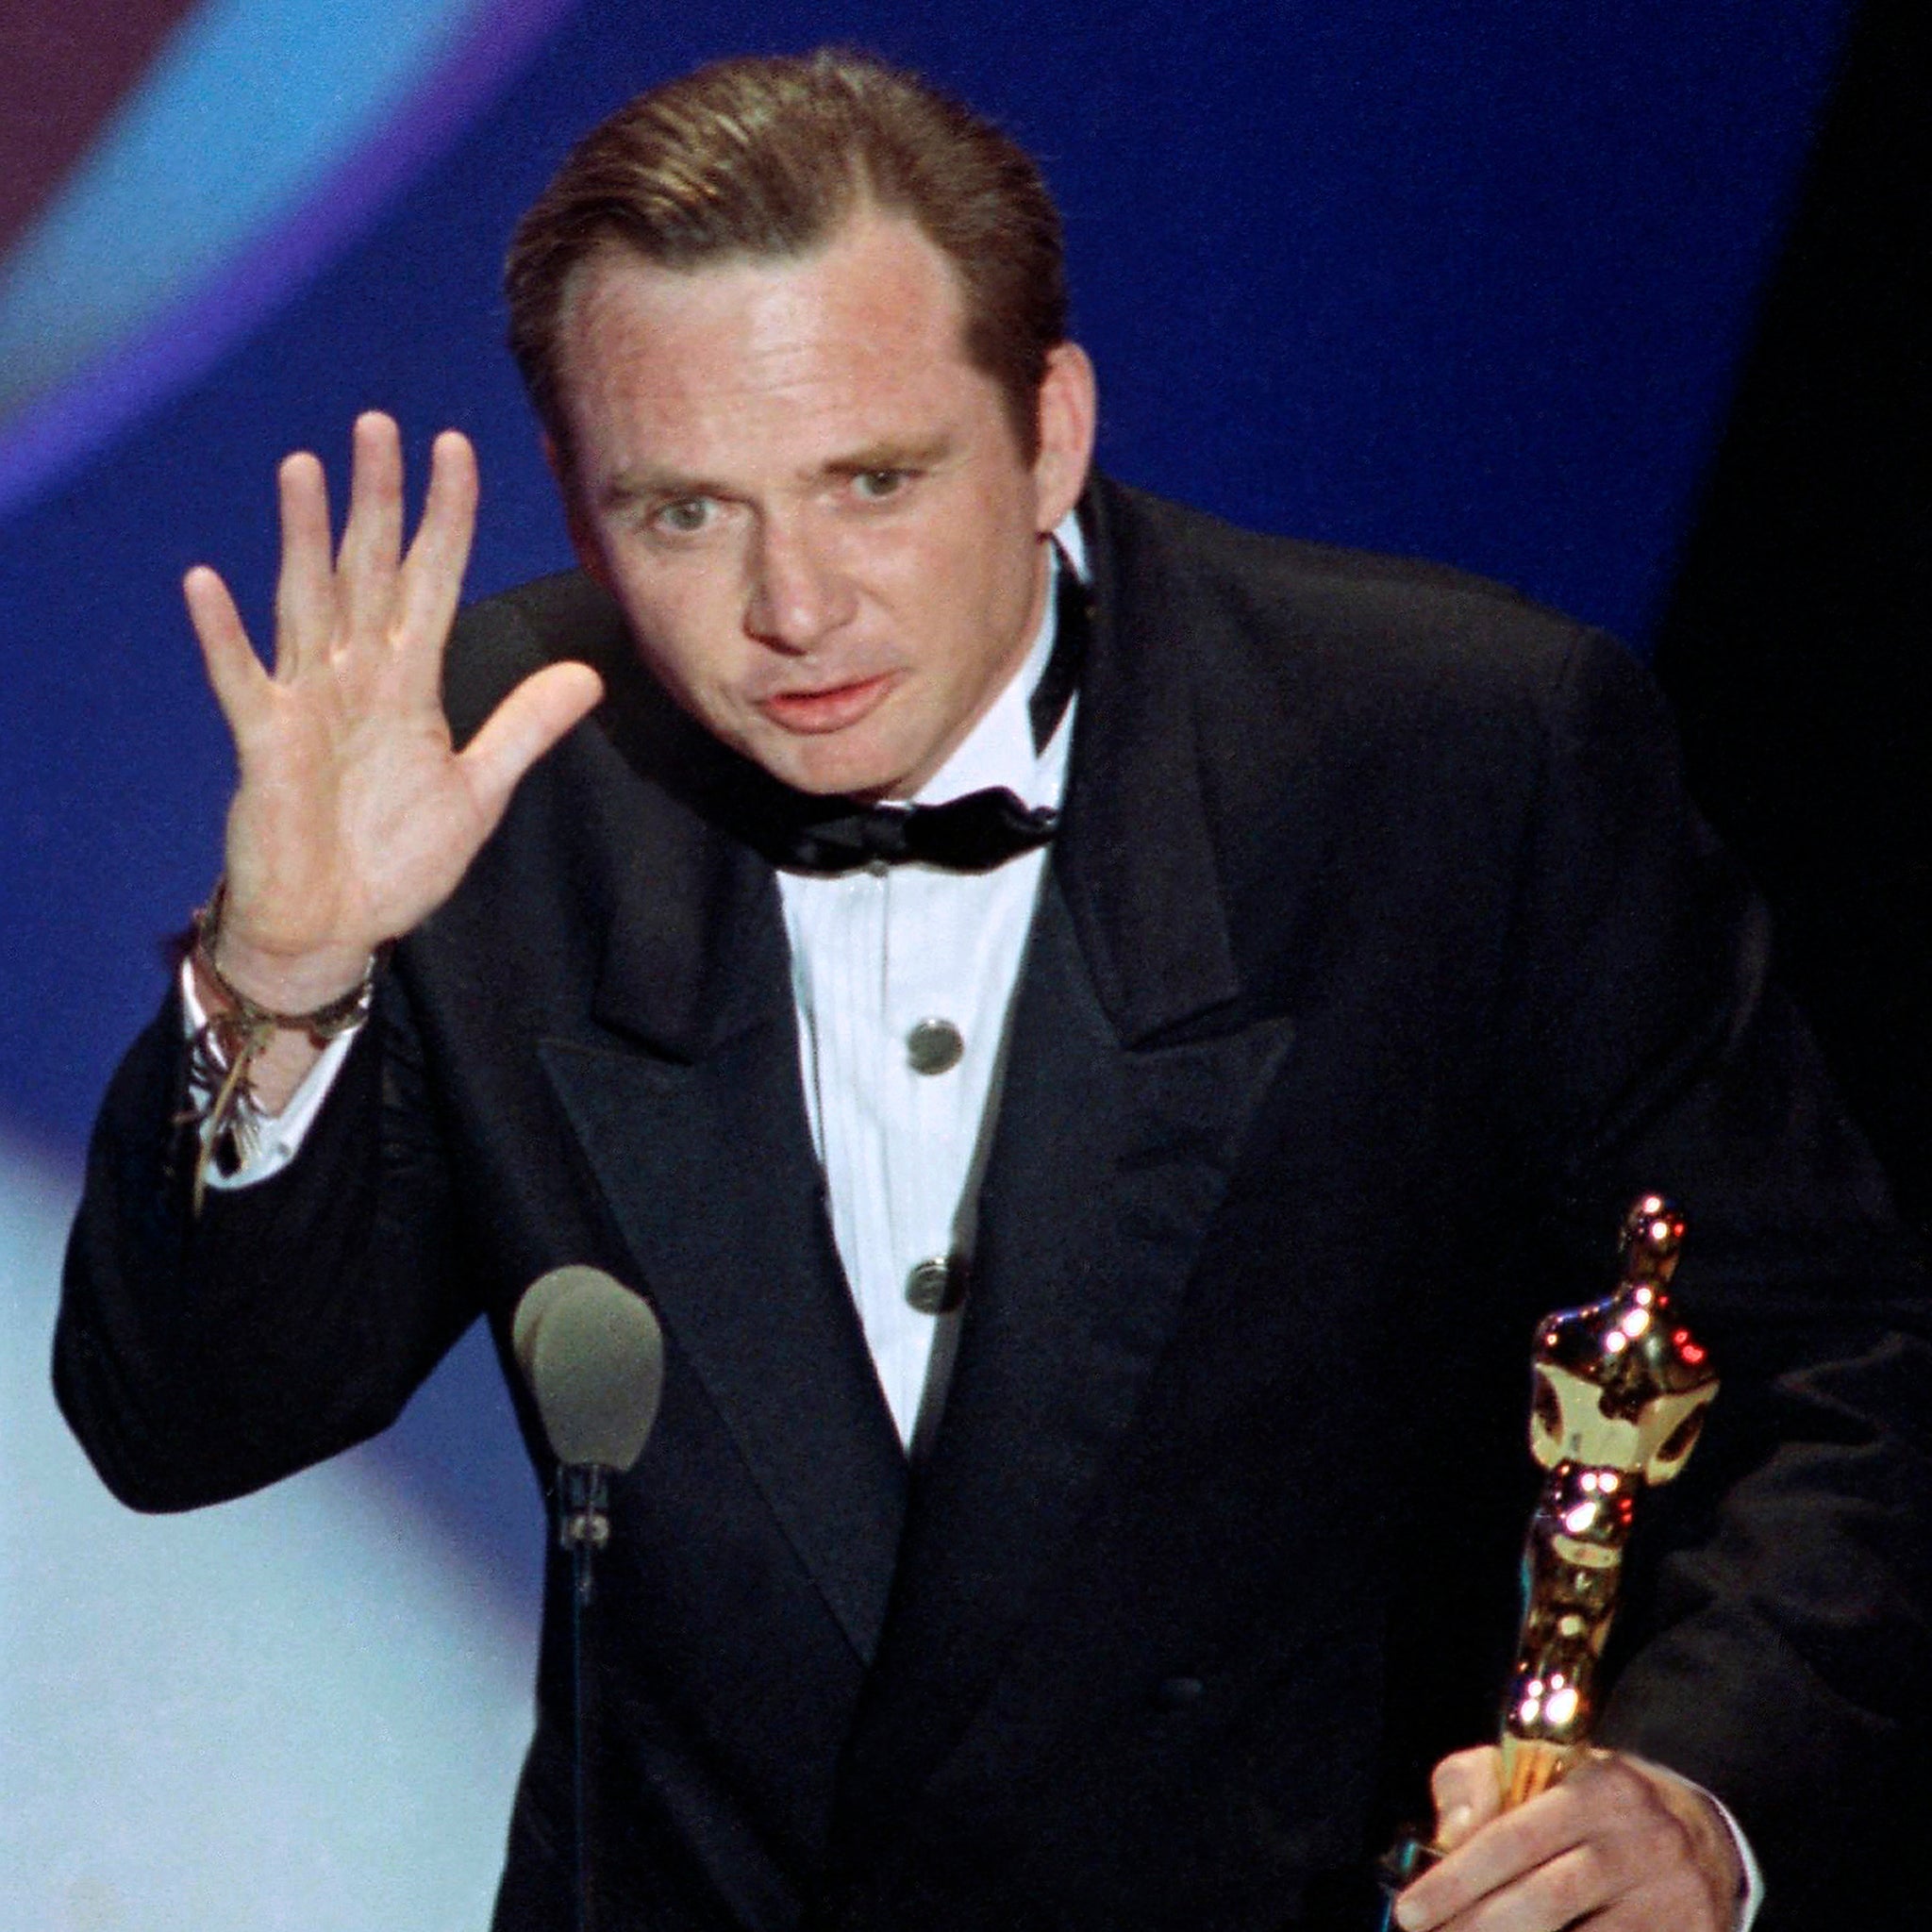 Michael Blake accepting the Oscar for best adapted screenplay for "Dances with Wolves" at the 63rd Annual Academy Awards in Los Angeles